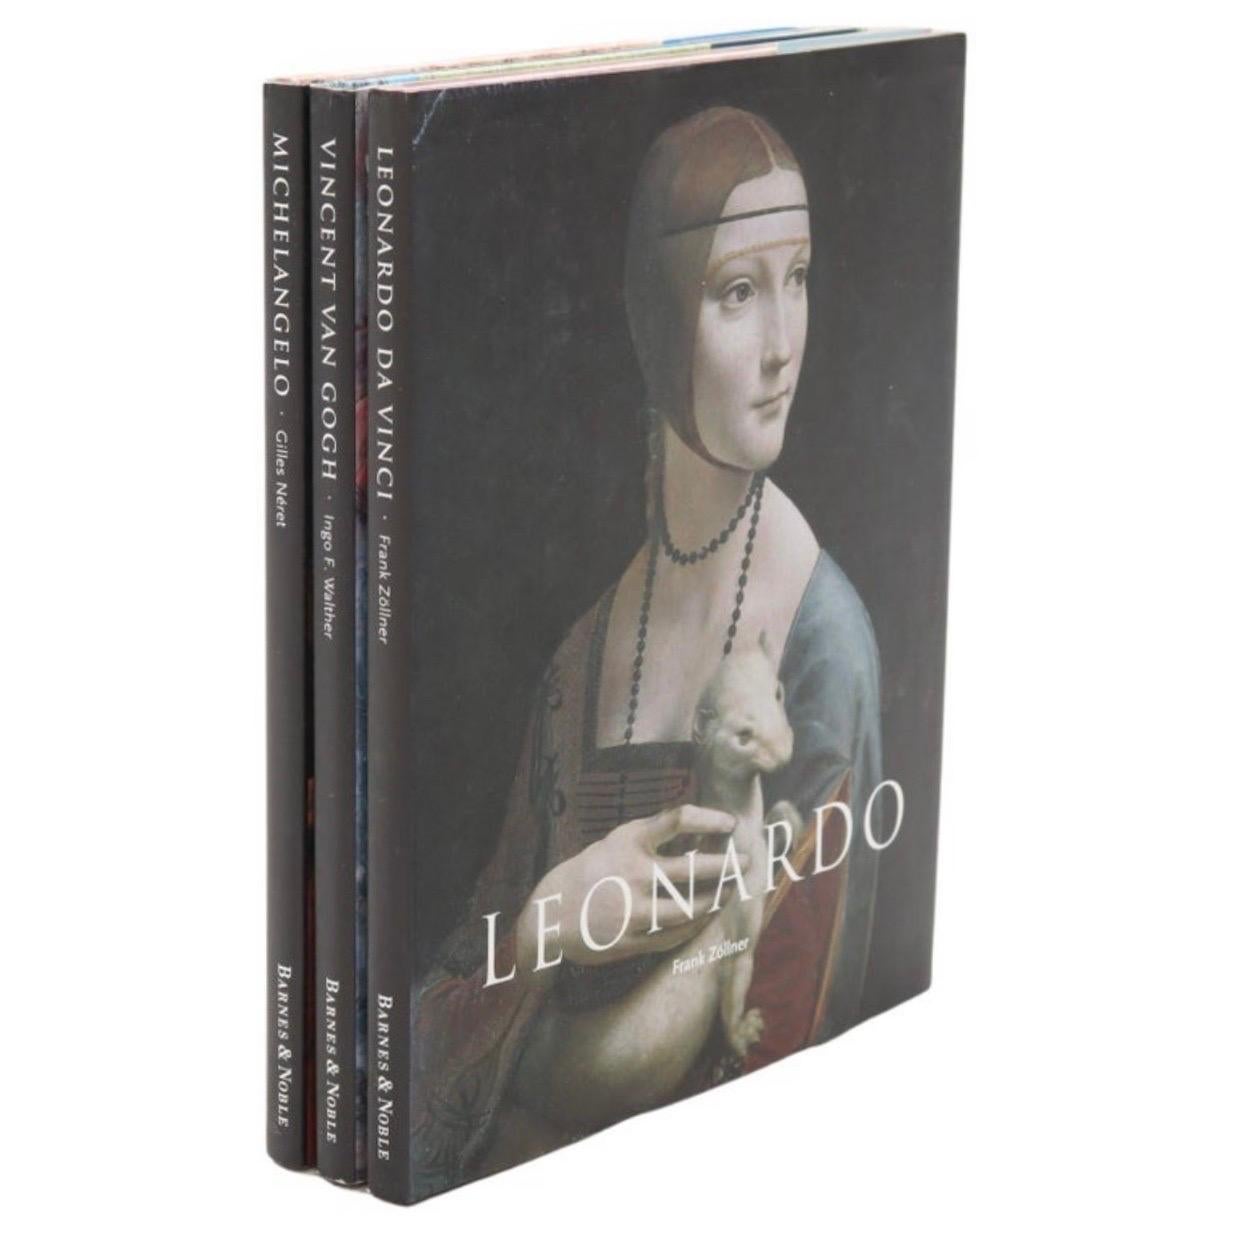 Leonardo, Michelangelo & Van Gogh art books. Published by Barnes & Noble in 2004. Hardcovers with dustjackets. Dimensions per book.